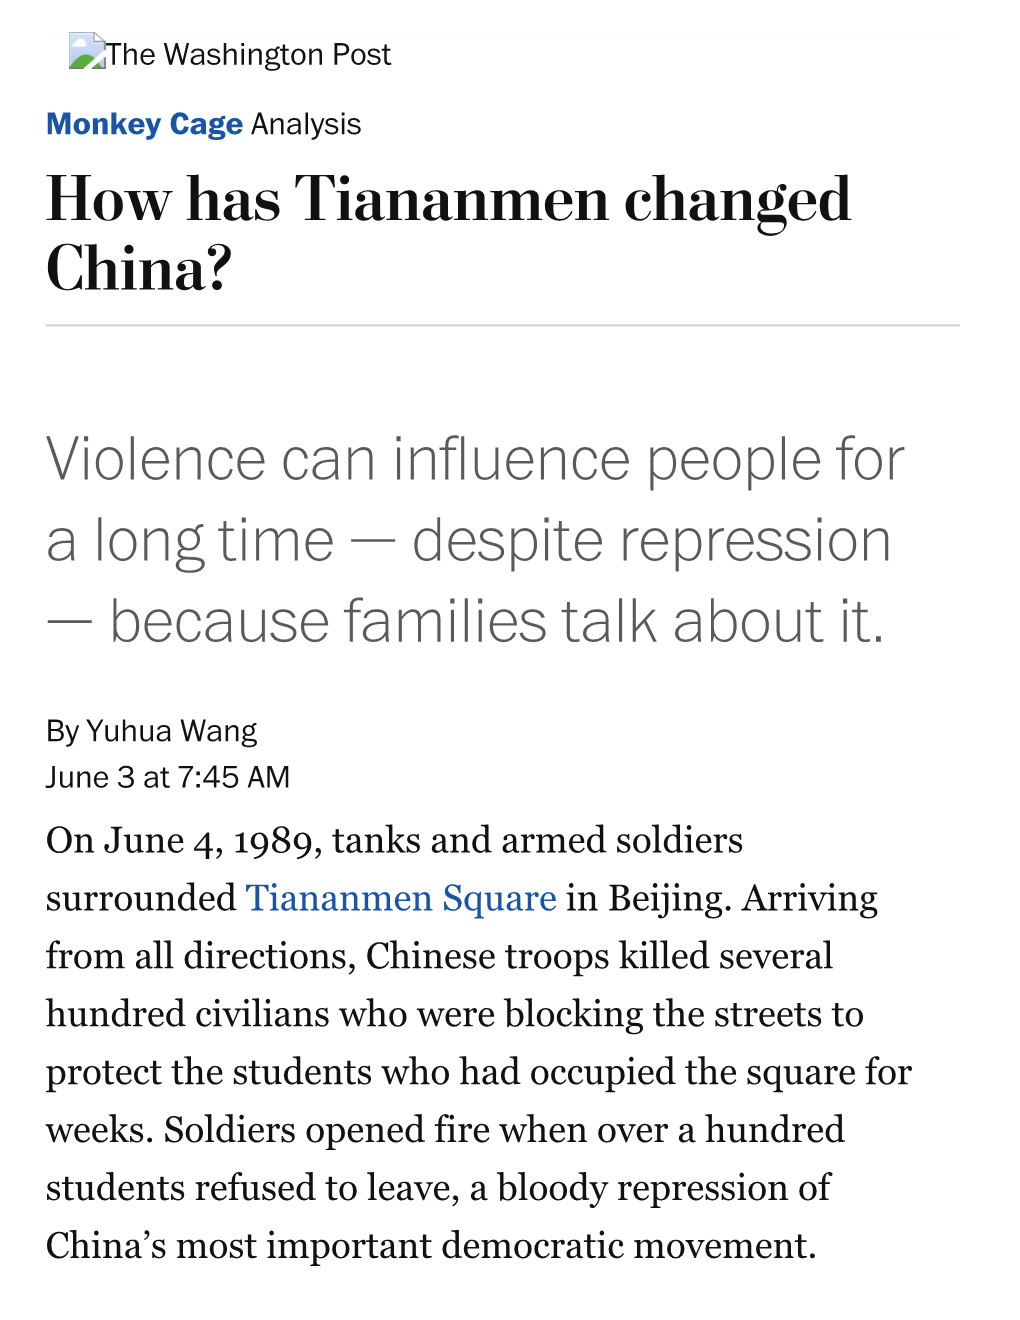 How Has Tiananmen Changed China? Violence Can Influence